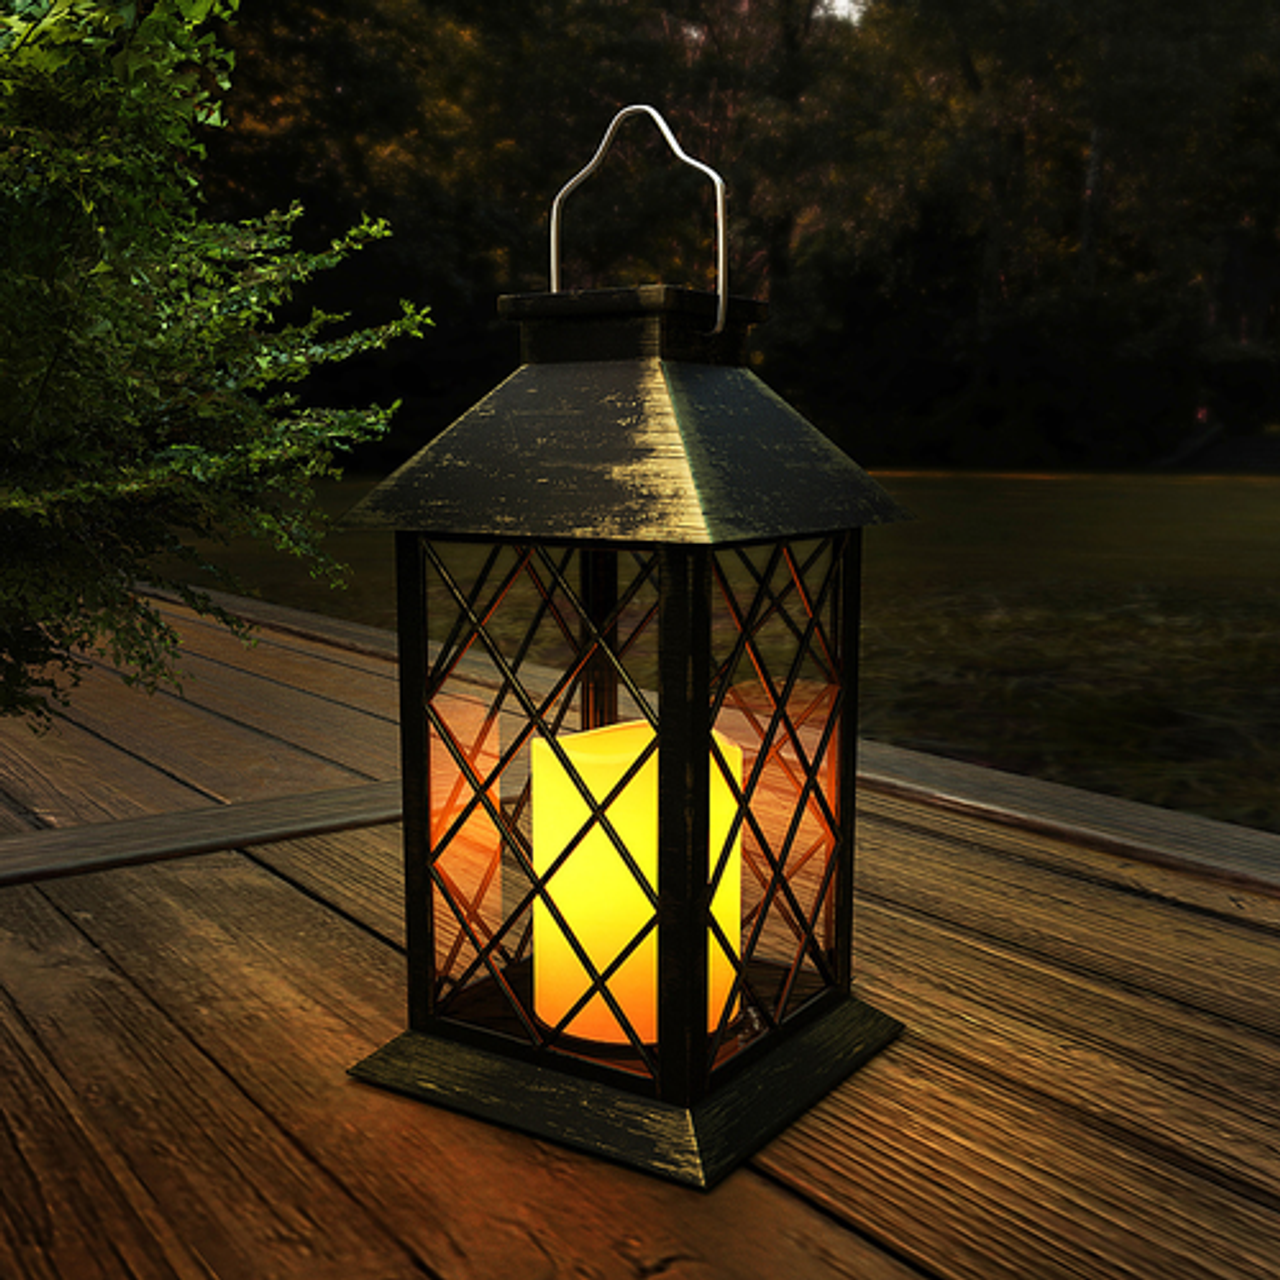 Nature Spring - Solar Lantern - Hanging or Tabletop Water Resistant LED Pillar Candle Lamp for Indoors or Outdoors by Hastings Home - Bronze